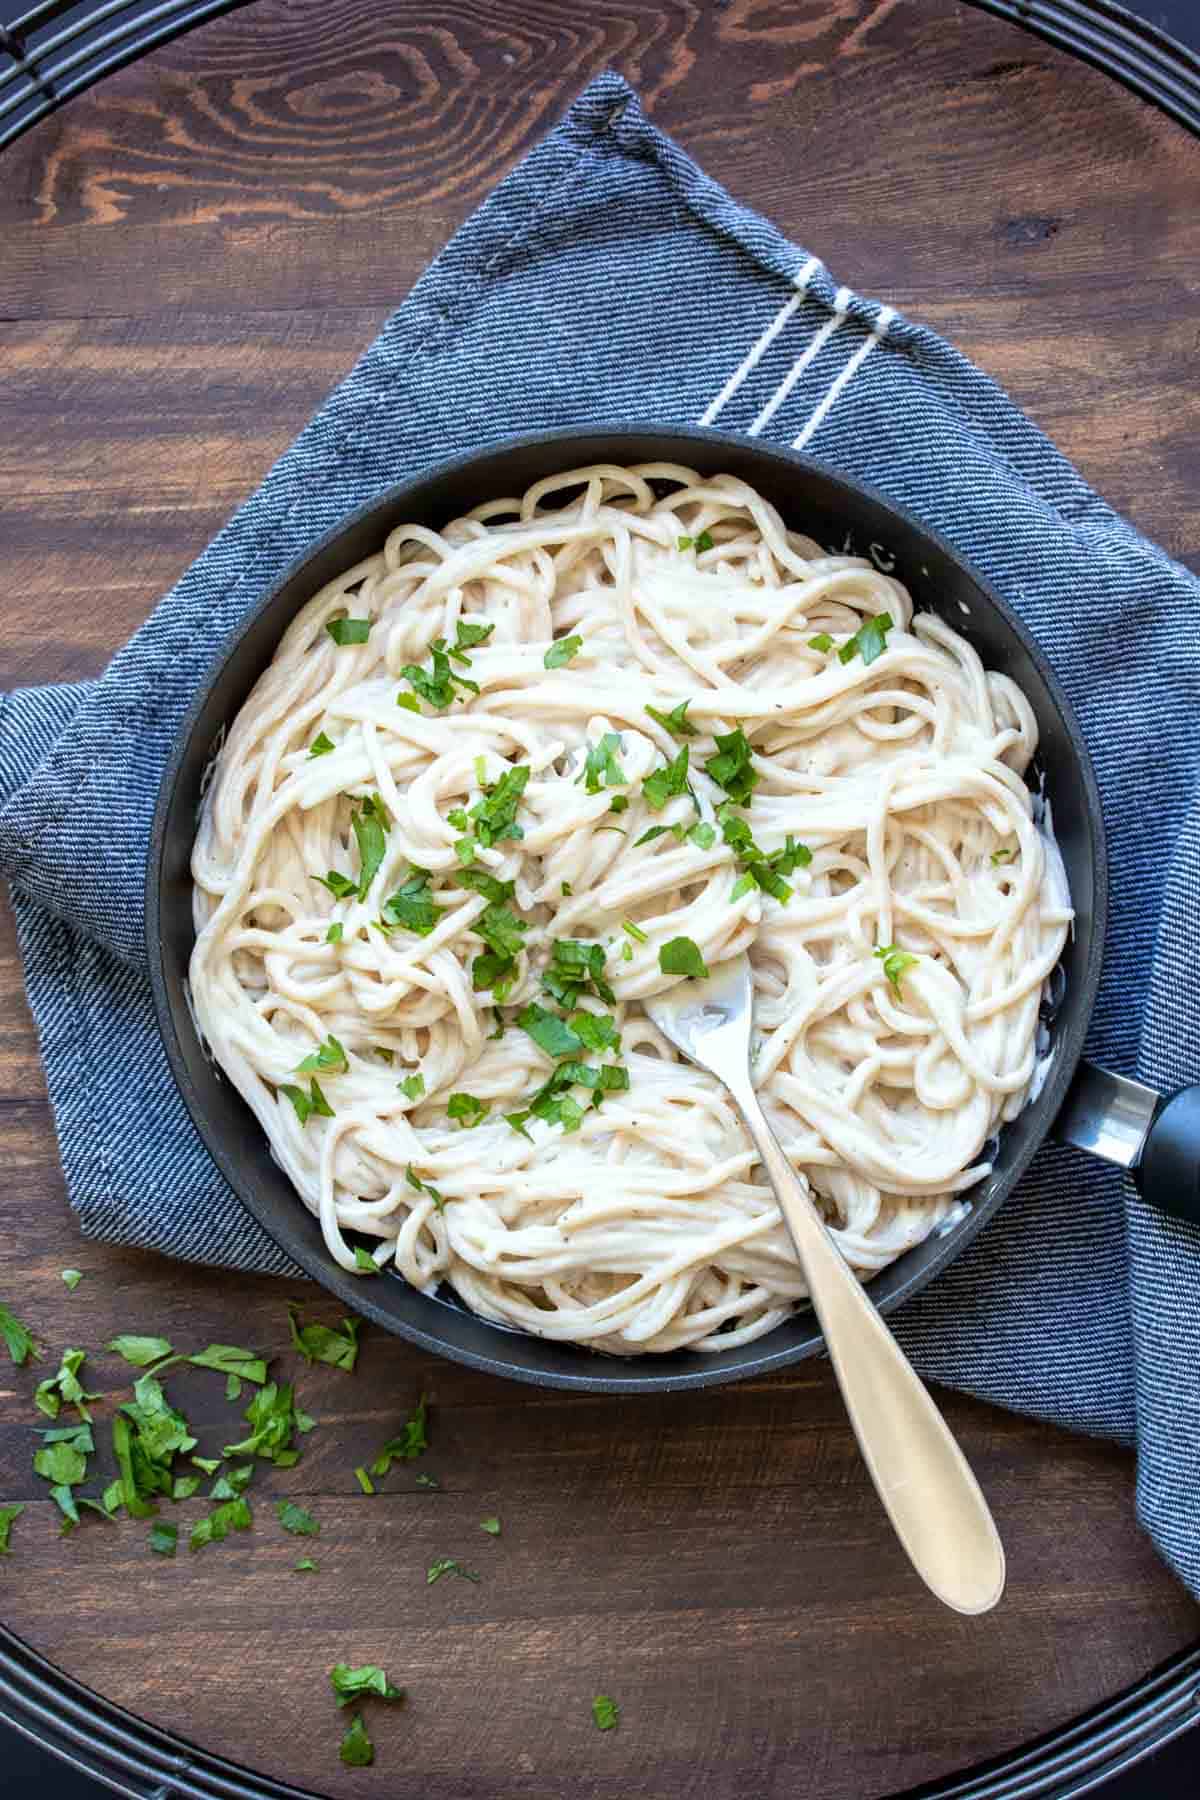 Top view of a black skillet filled with Alfredo pasta and sprinkled with parsley